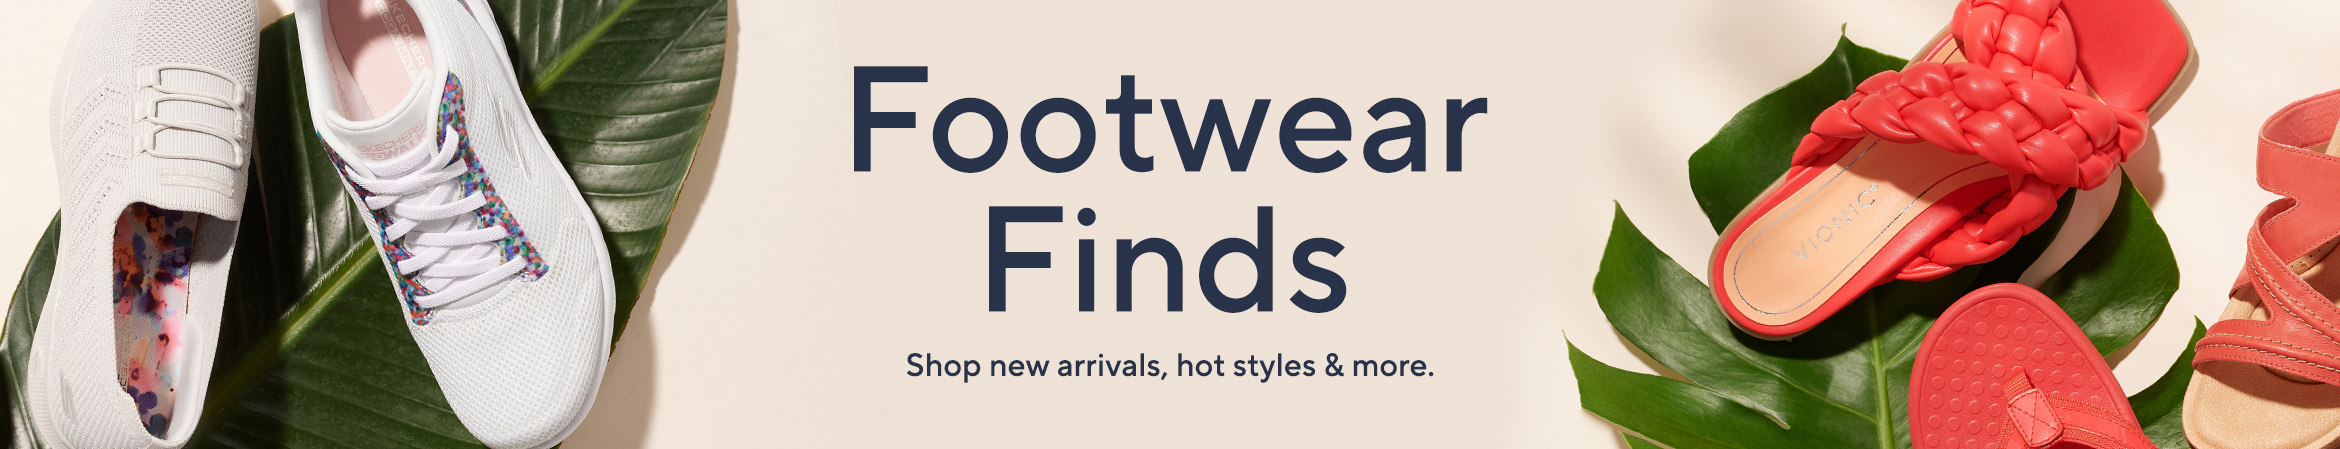 Footwear Finds: Shop new arrivals, hot styles & more.